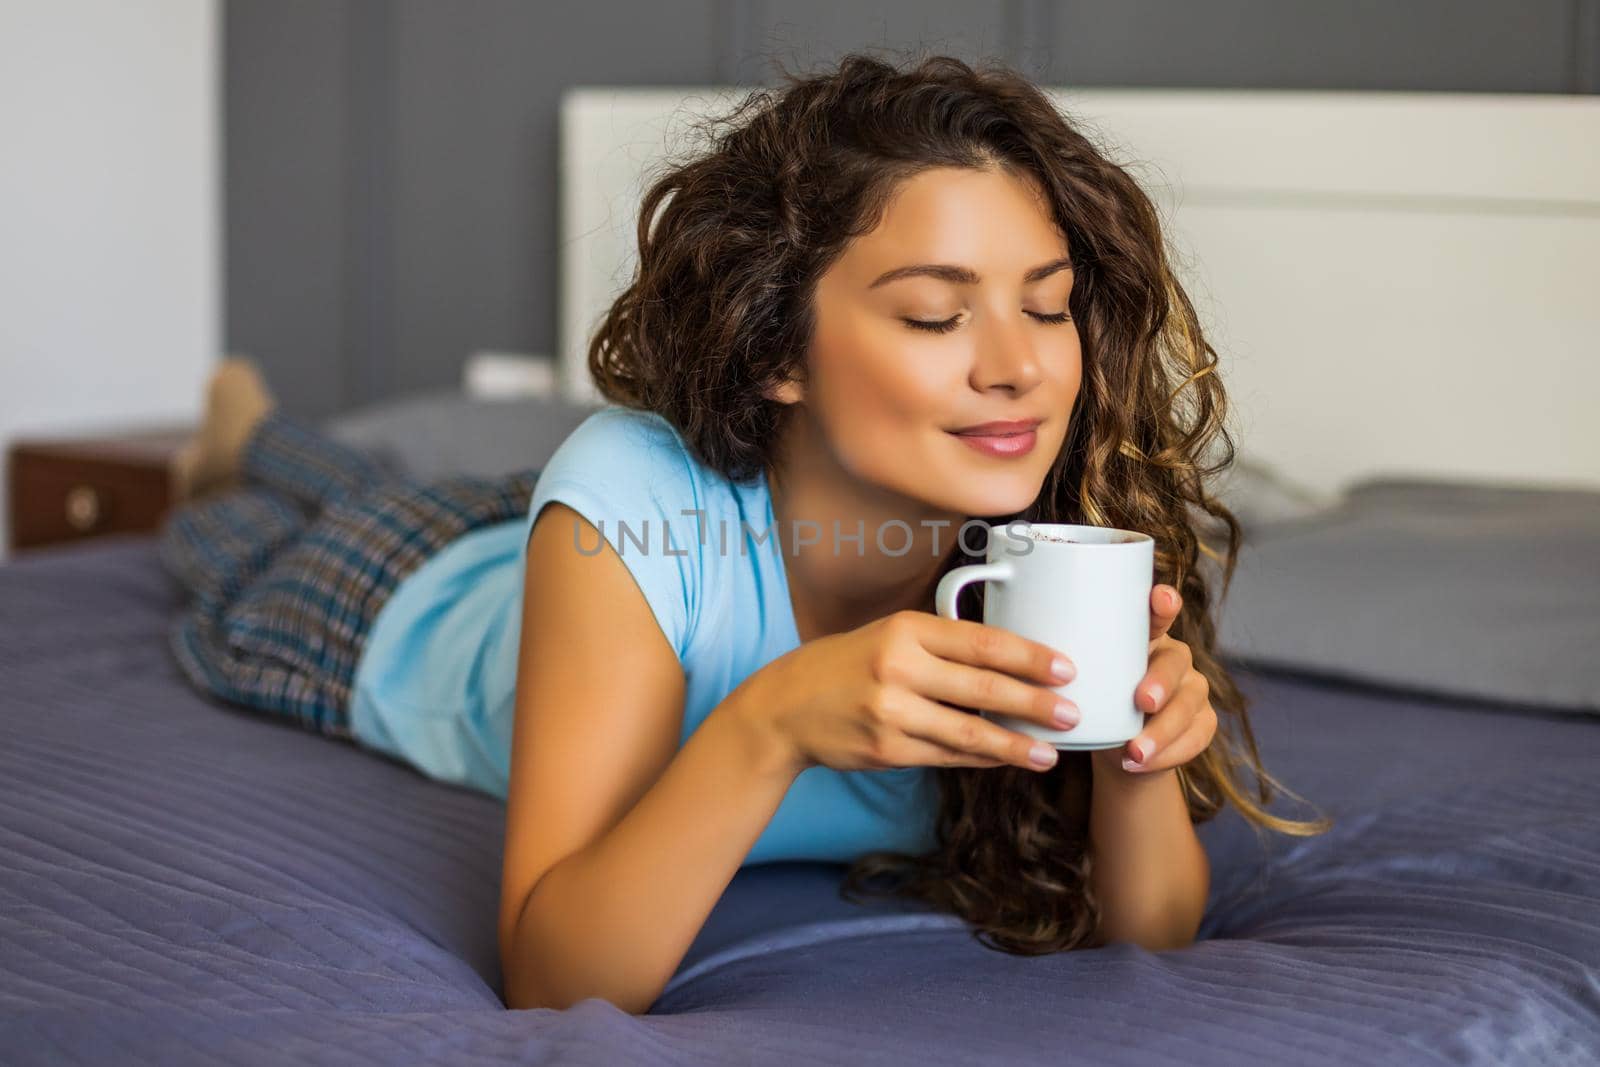 Beautiful woman enjoys drinking coffee in her bed.